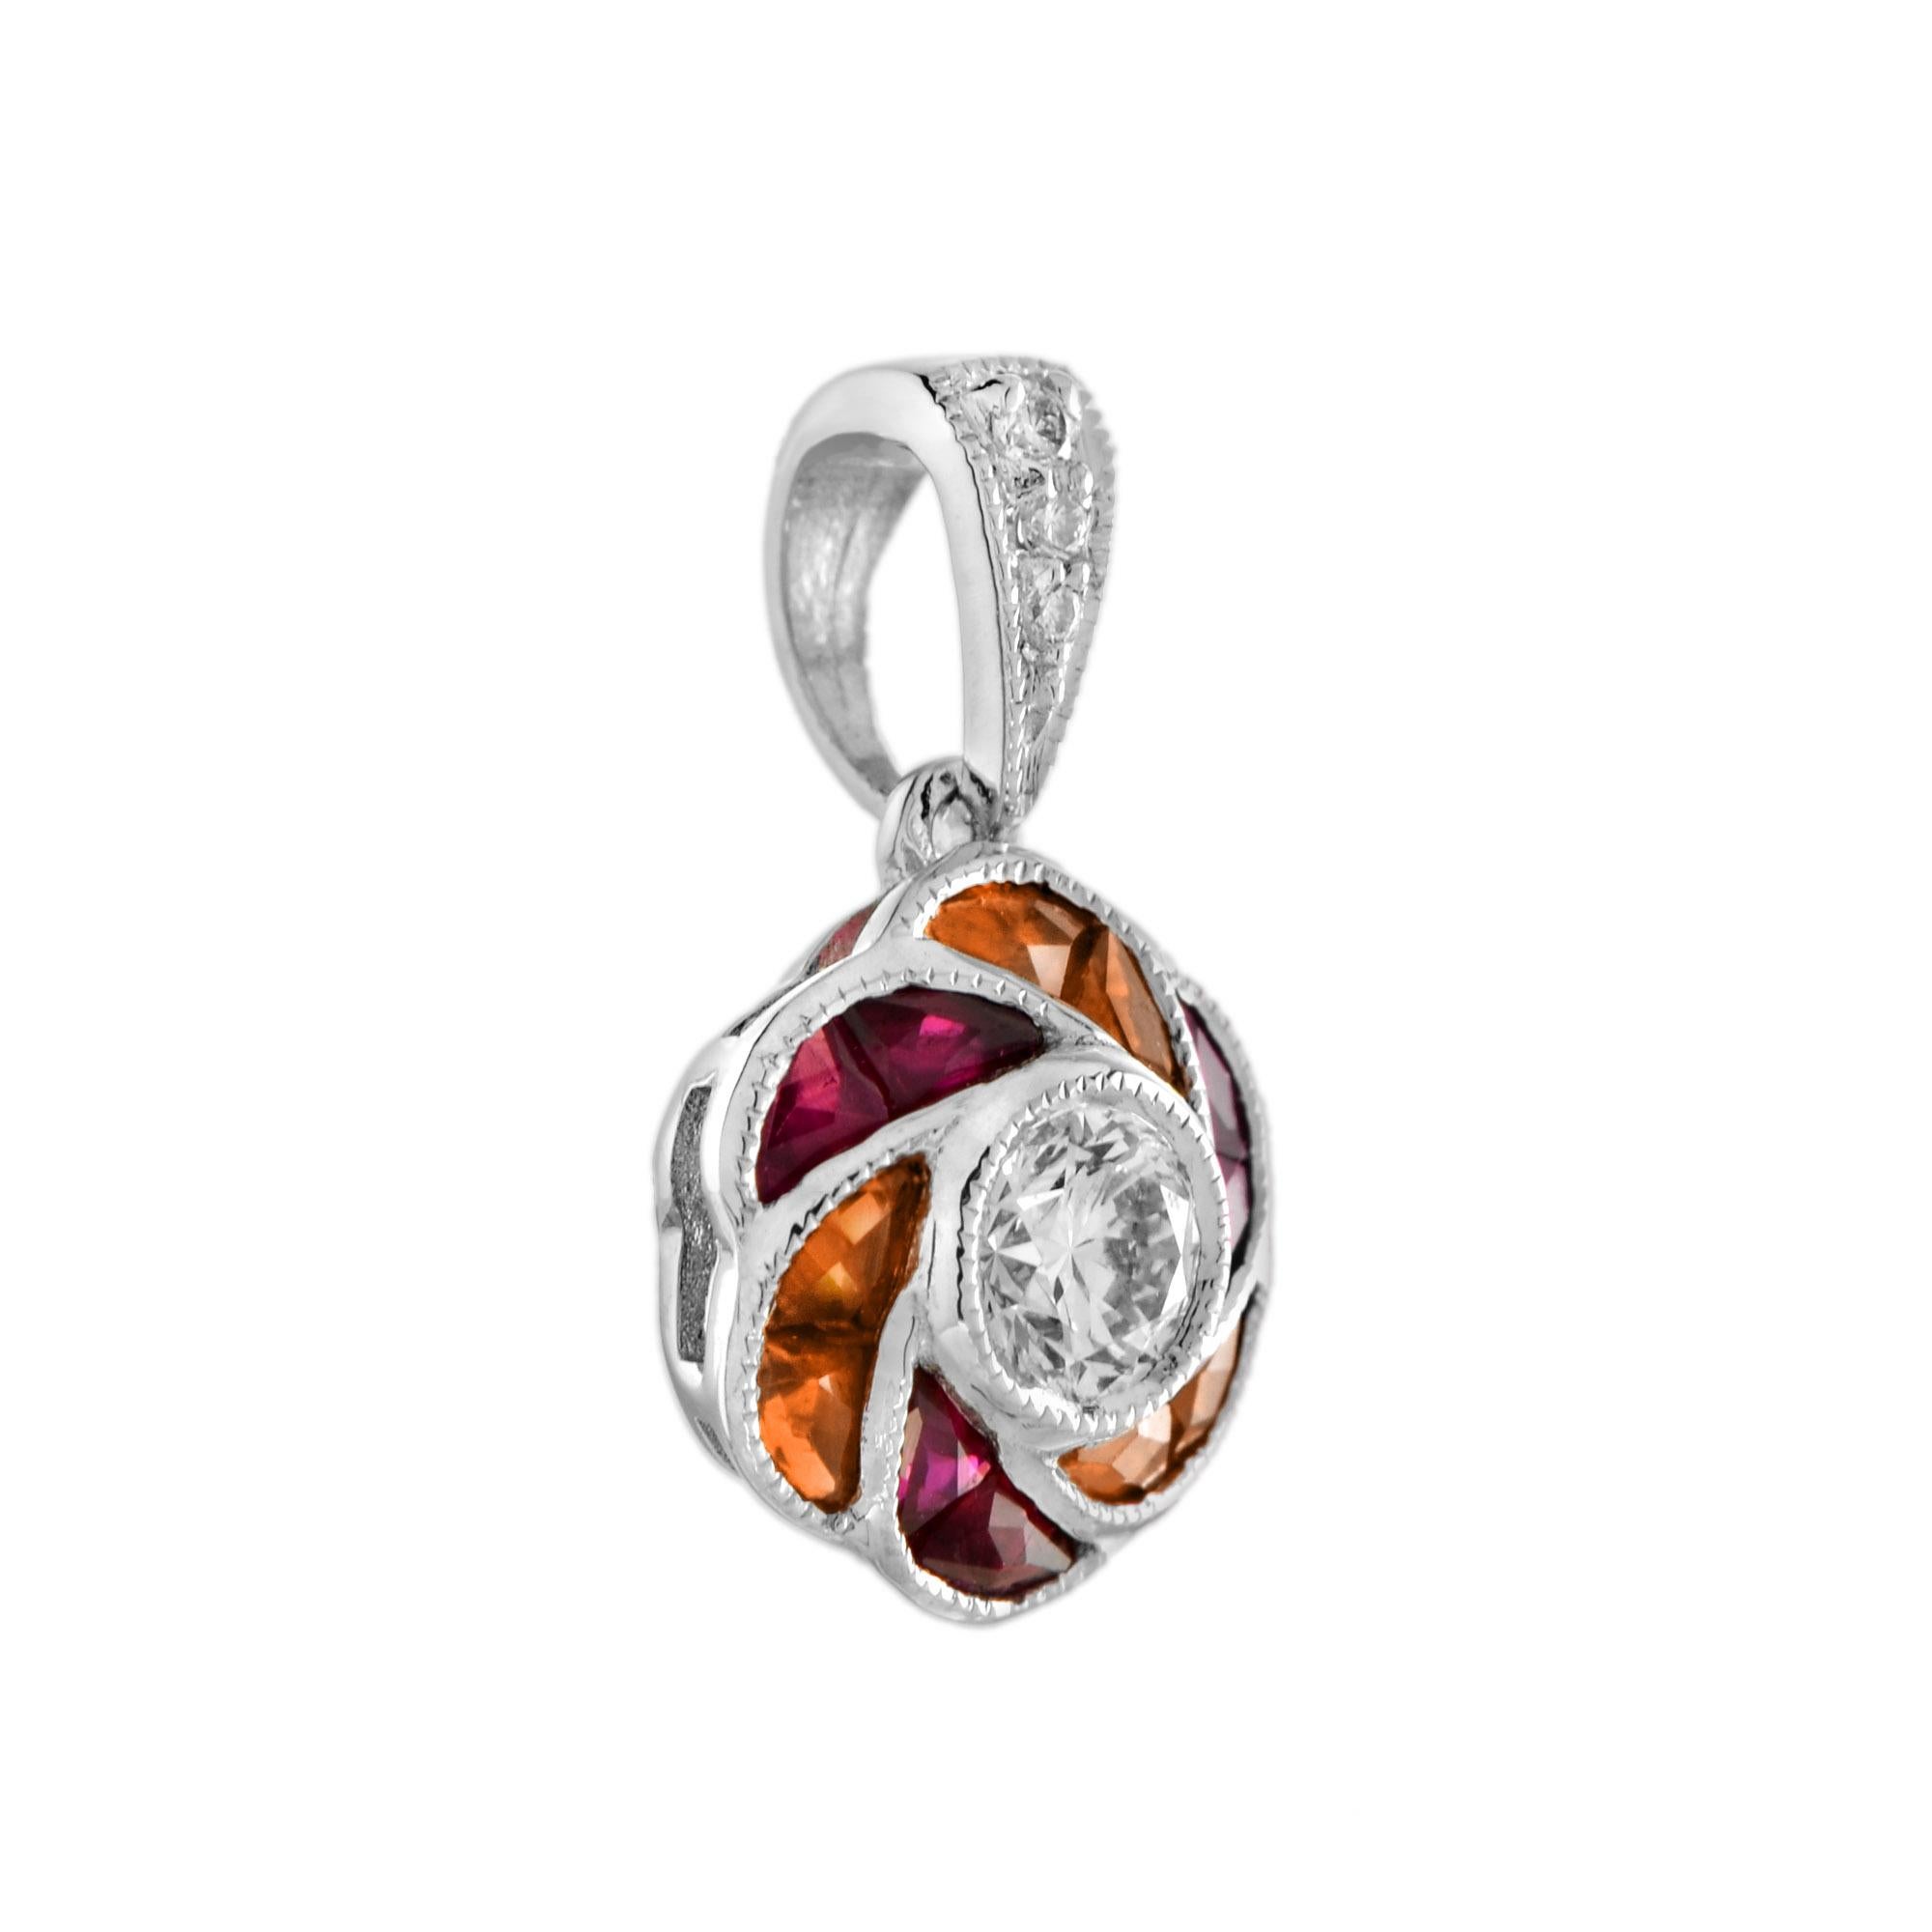 Perfect with everyday wear, these charming vintage Art Deco revivalist design pendant feature a brilliant cut diamonds surrounded by ruby and bright orange sapphire for rose petals finished look all in 18K white gold.

Information
Style: